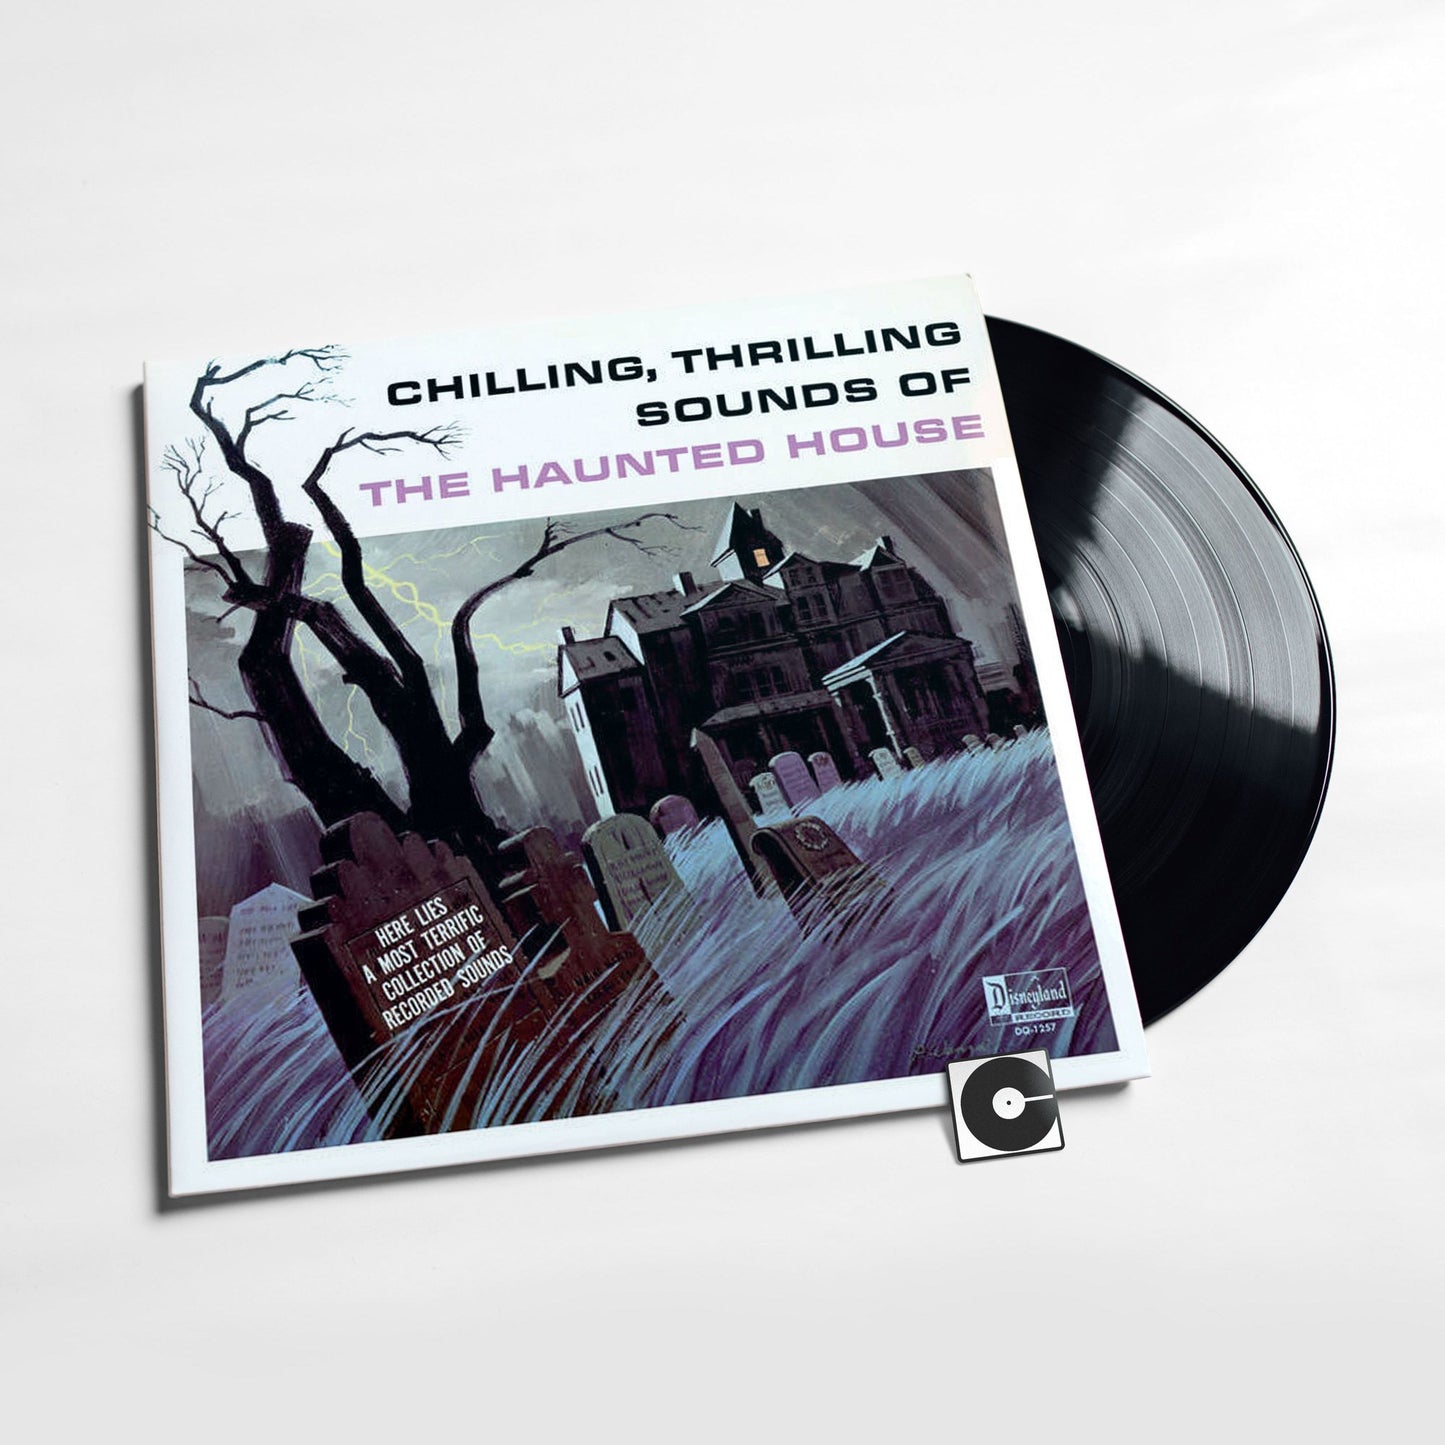 Various Artists - "Chilling, Thrilling Souds Of The Haunted House"